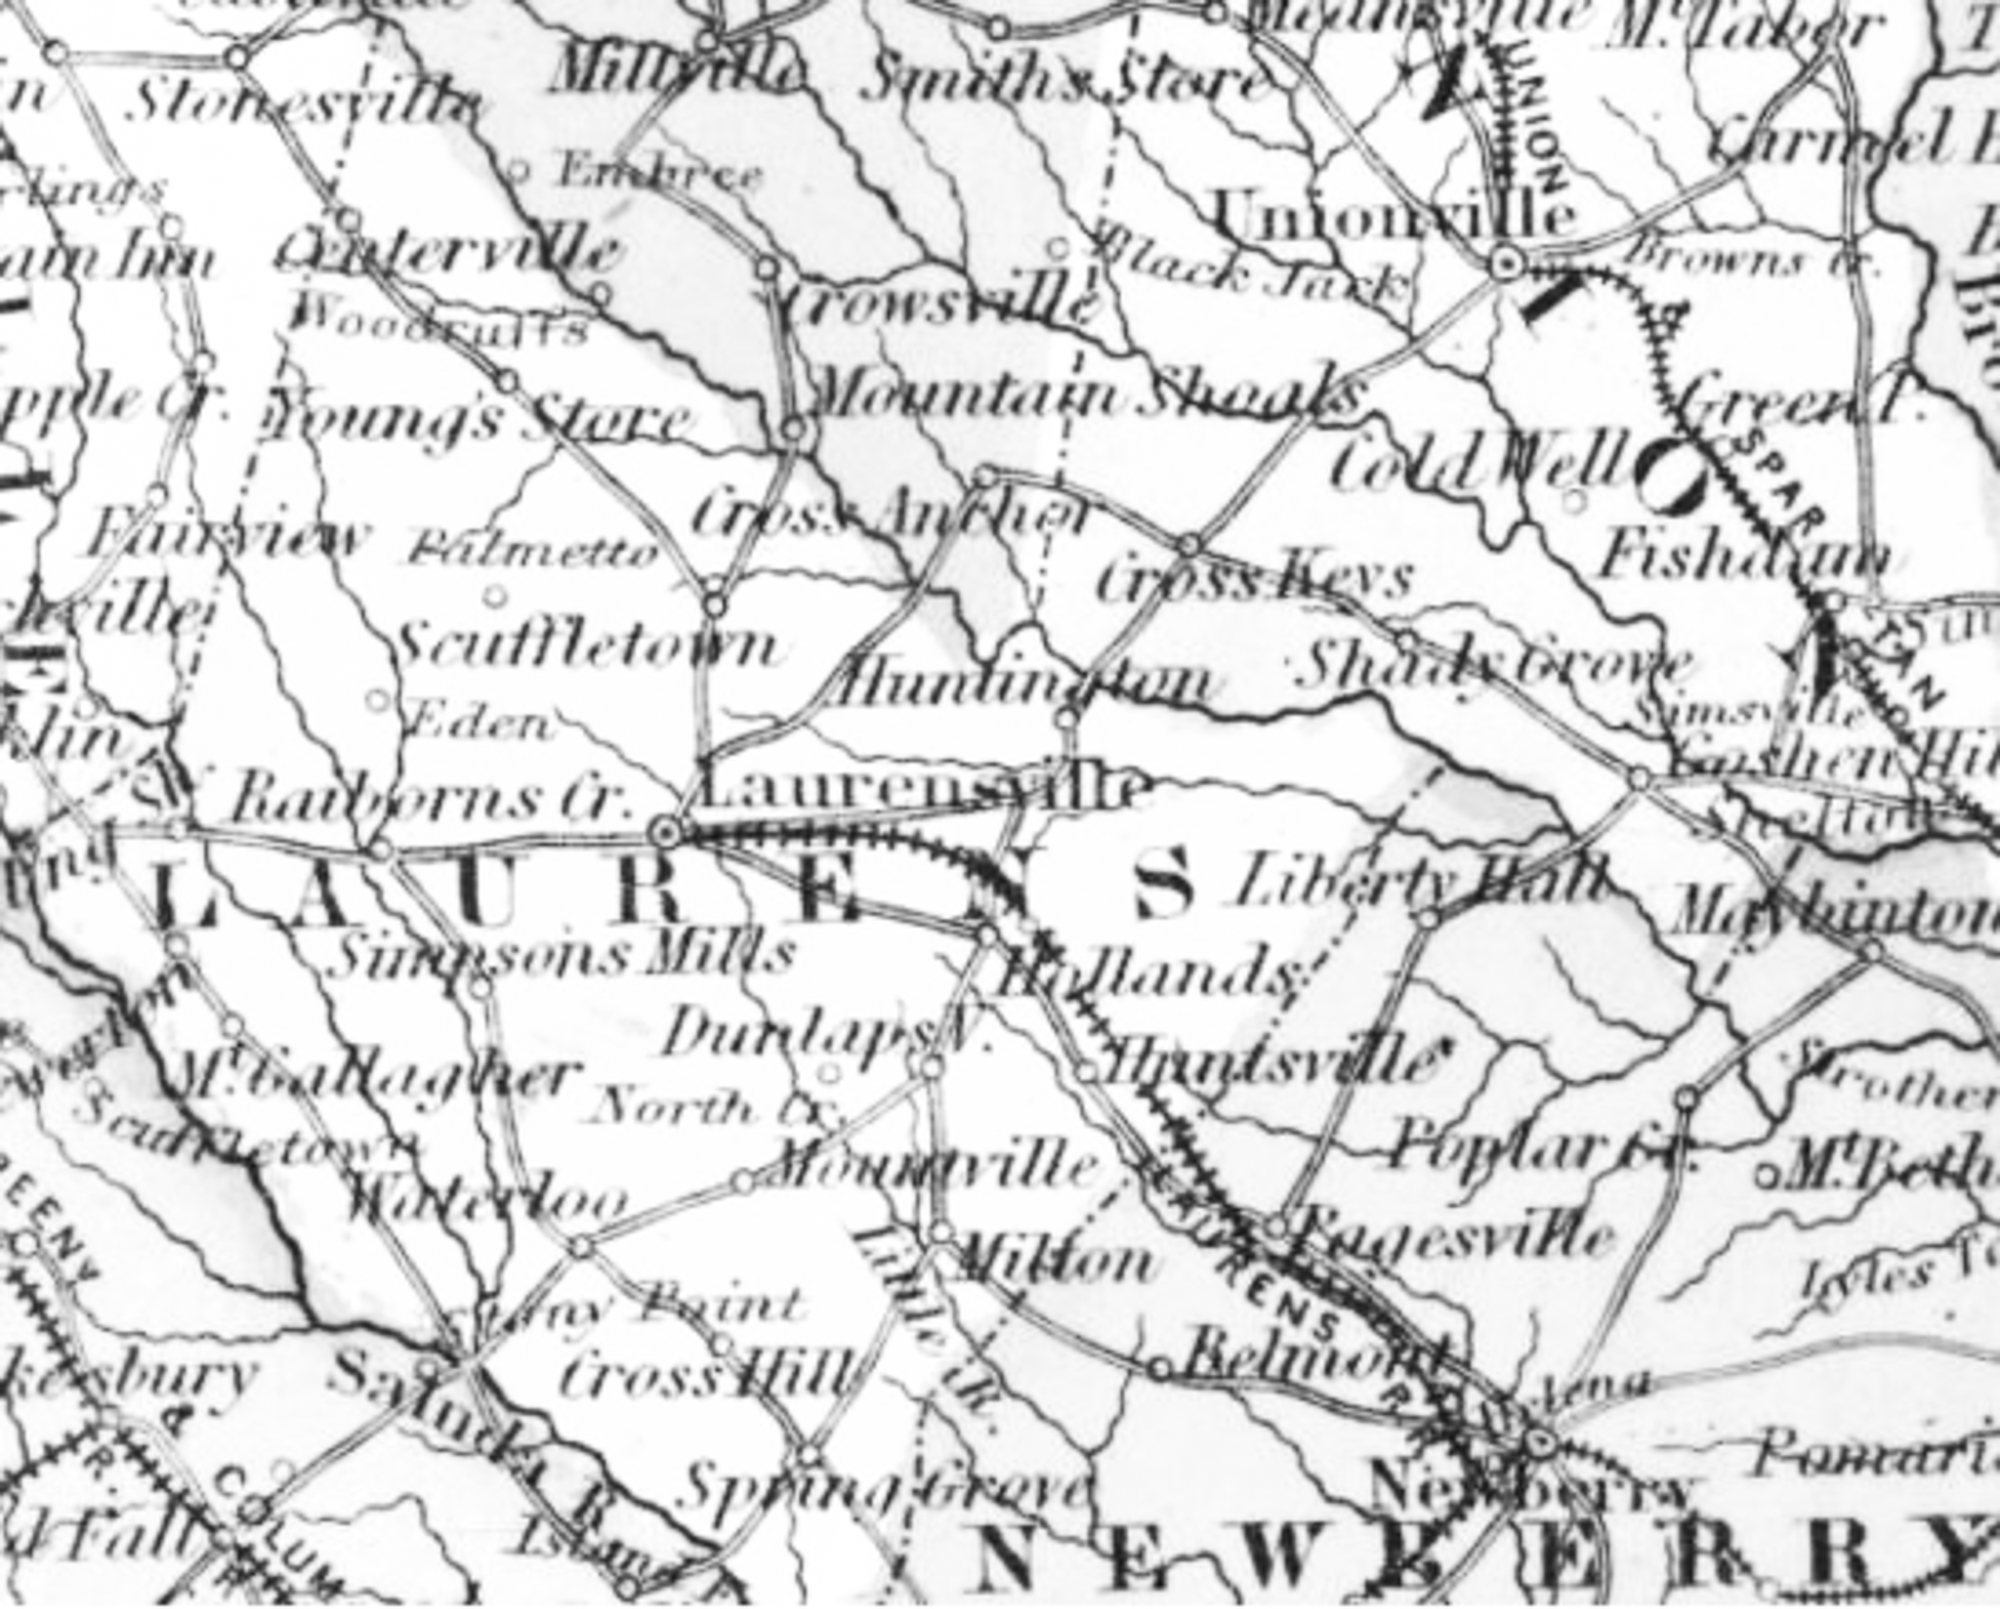 1856 MAP OF EASTERN LAURENS CO., SC - Courtesy of the New York J.H. Colton and Company, 1856; from Colton’s Atlas of the World